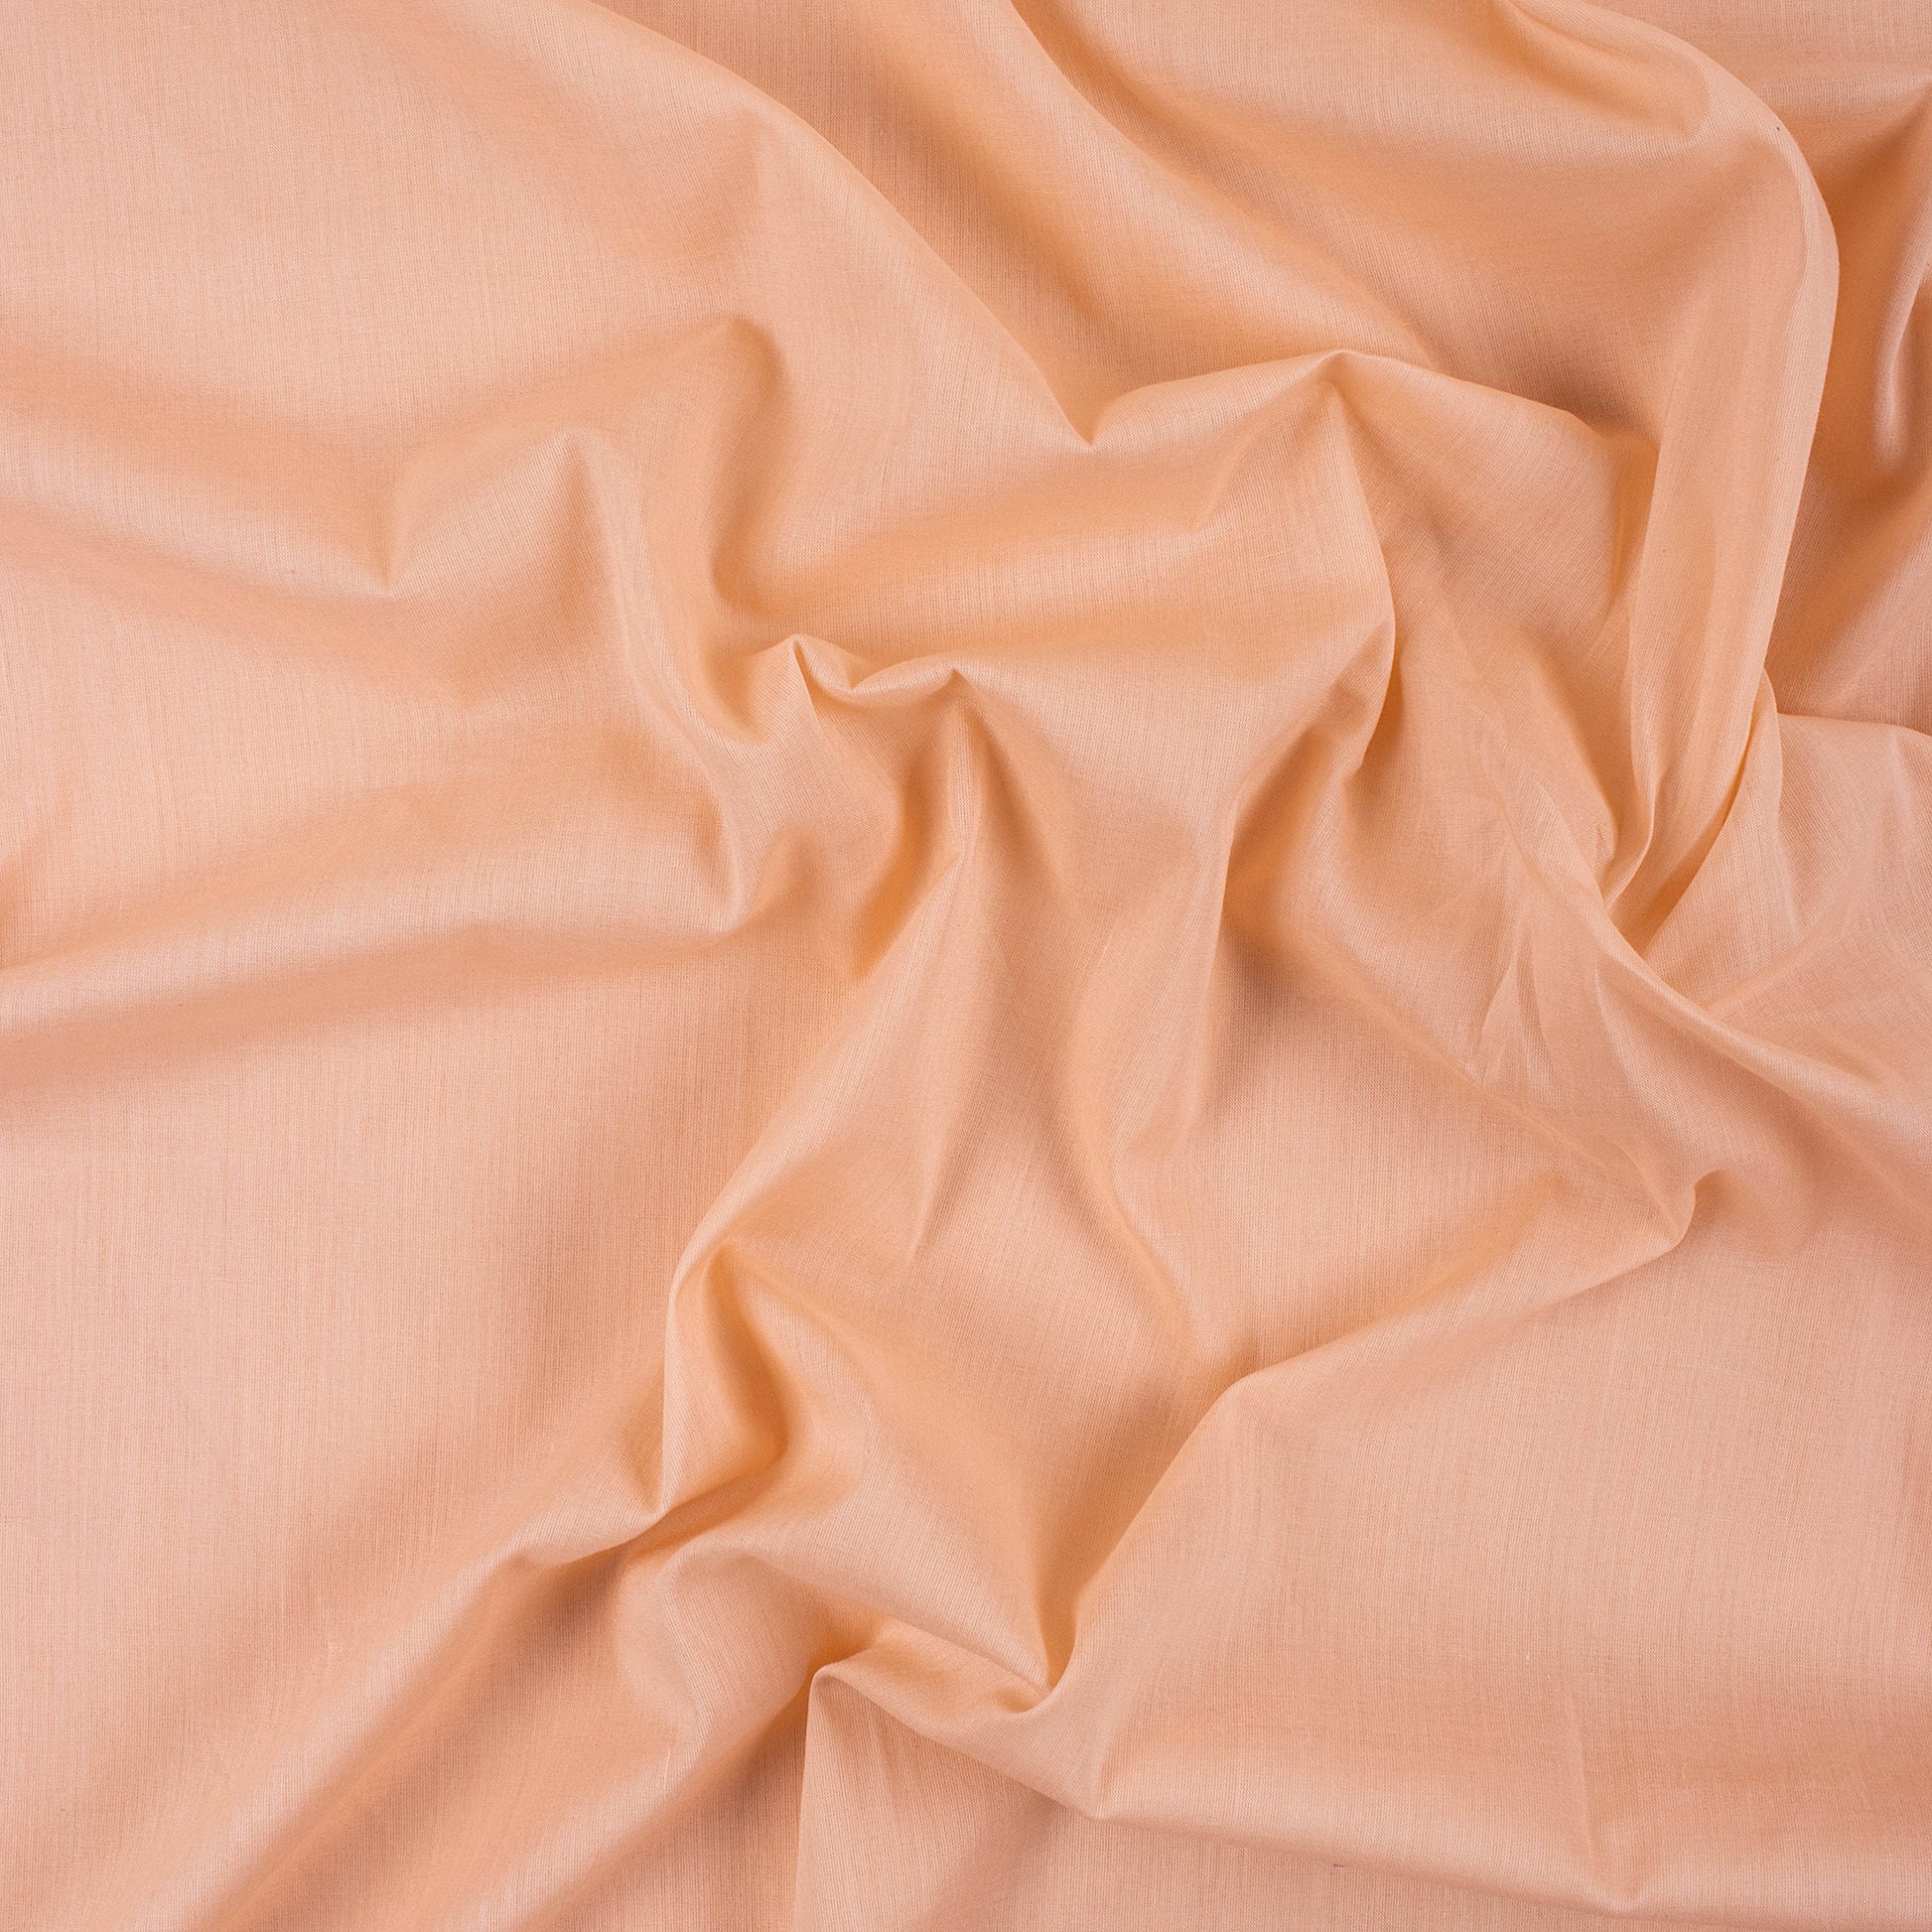 Soft Light Pink Cotton Dyed Solid Fabric Online